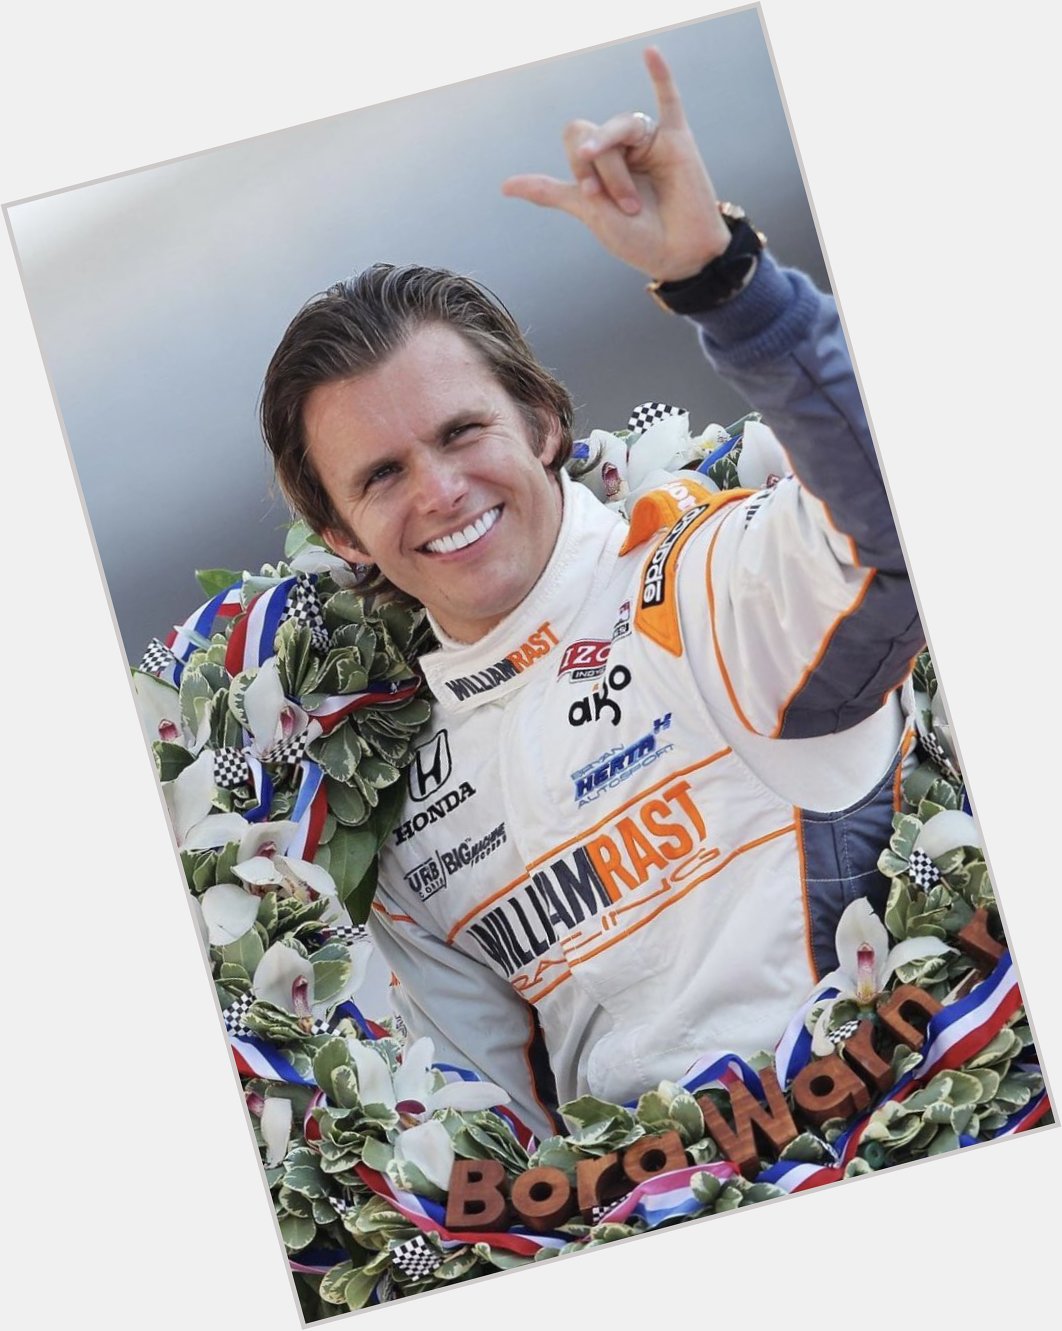 Happy Birthday!  Dan Wheldon on what would ve been his 44th birthday 